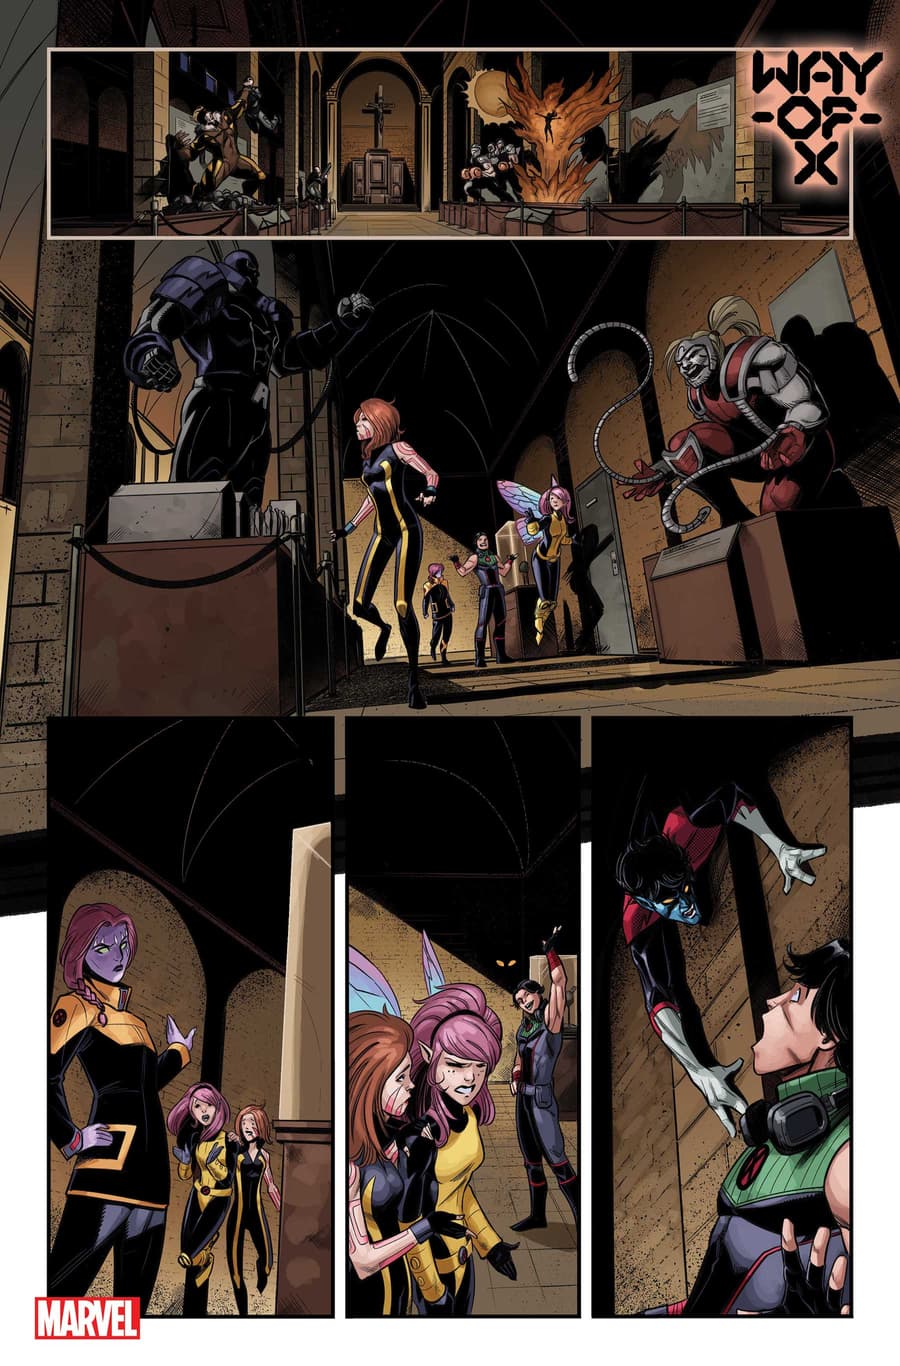 WAY OF X #1 preview interiors by Bob Quinn with colors by Java Tartaglia